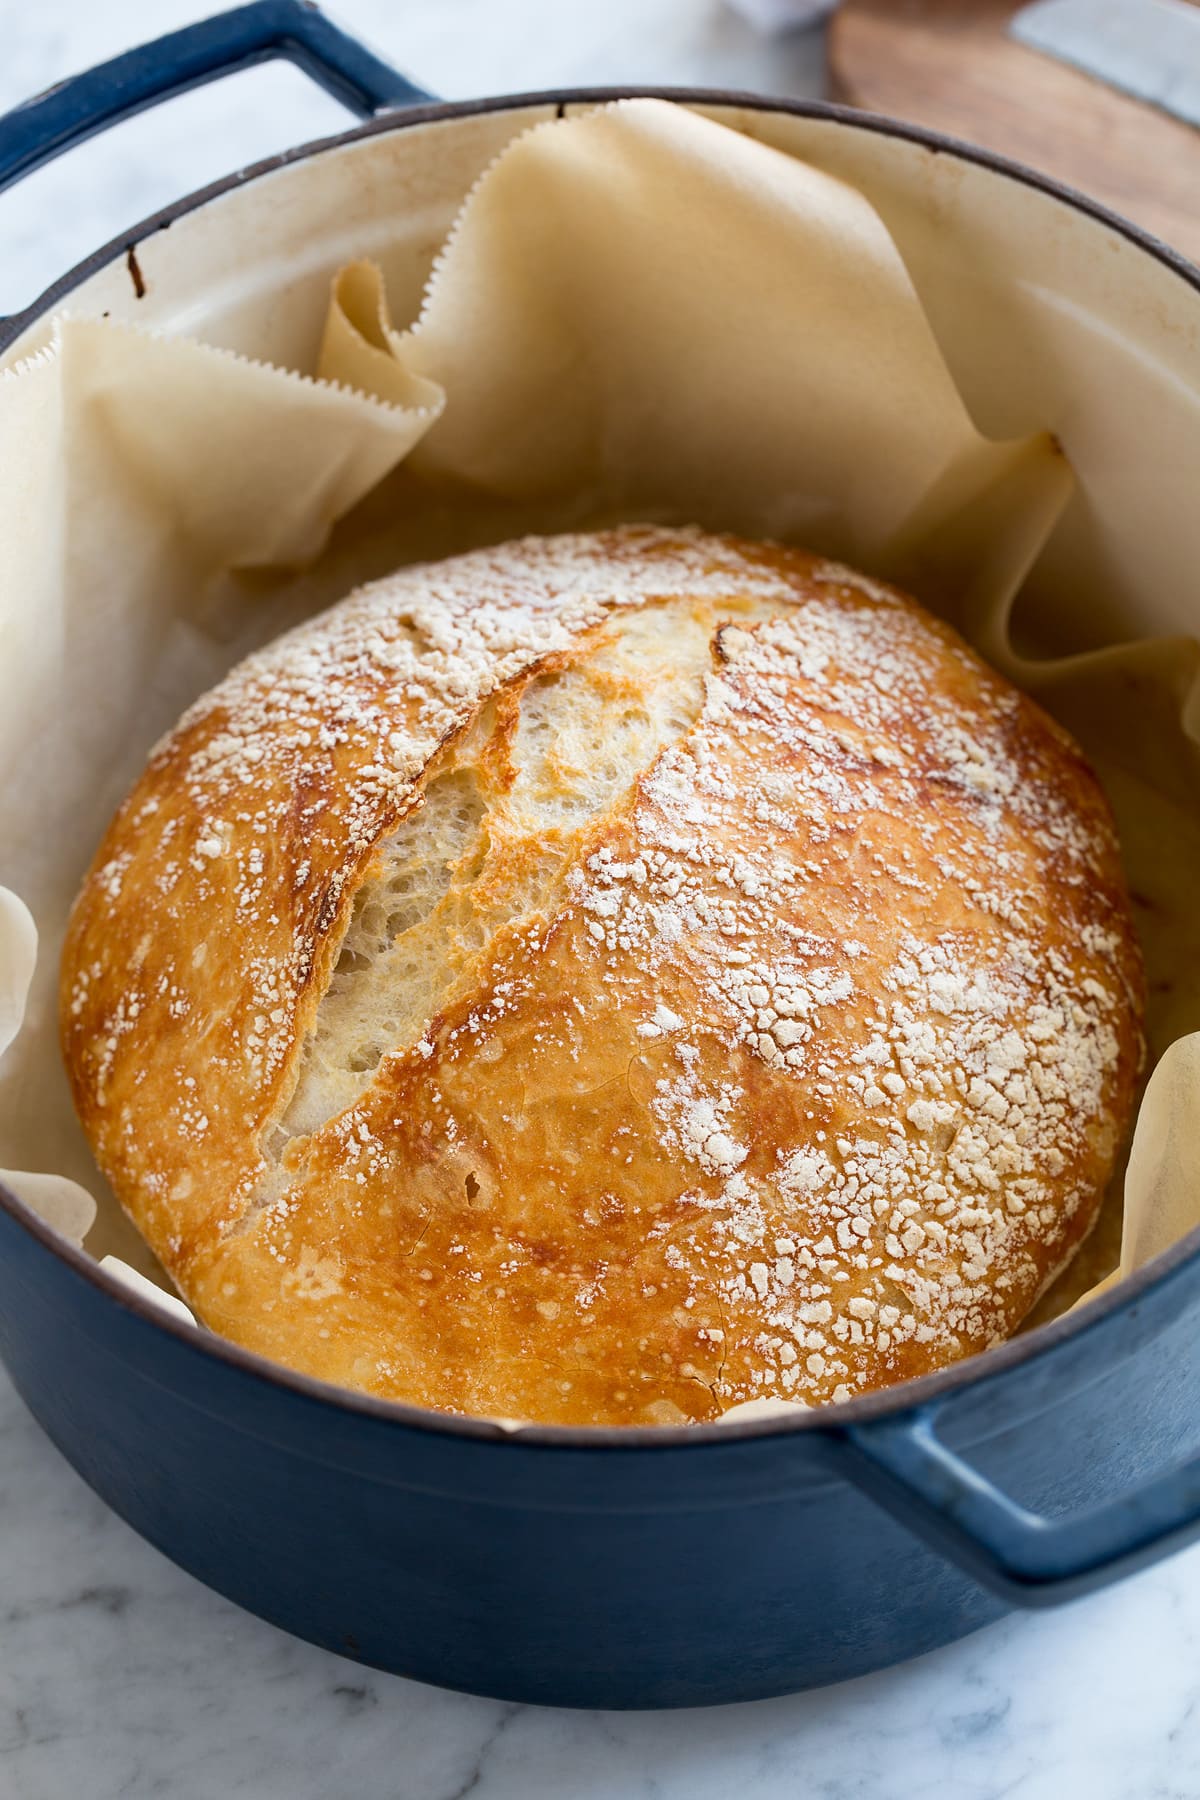 No knead bread in a large blue enameled cast iron pot. Bread is sitting on a sheet of parchment paper and pot is resting on a marble surface.